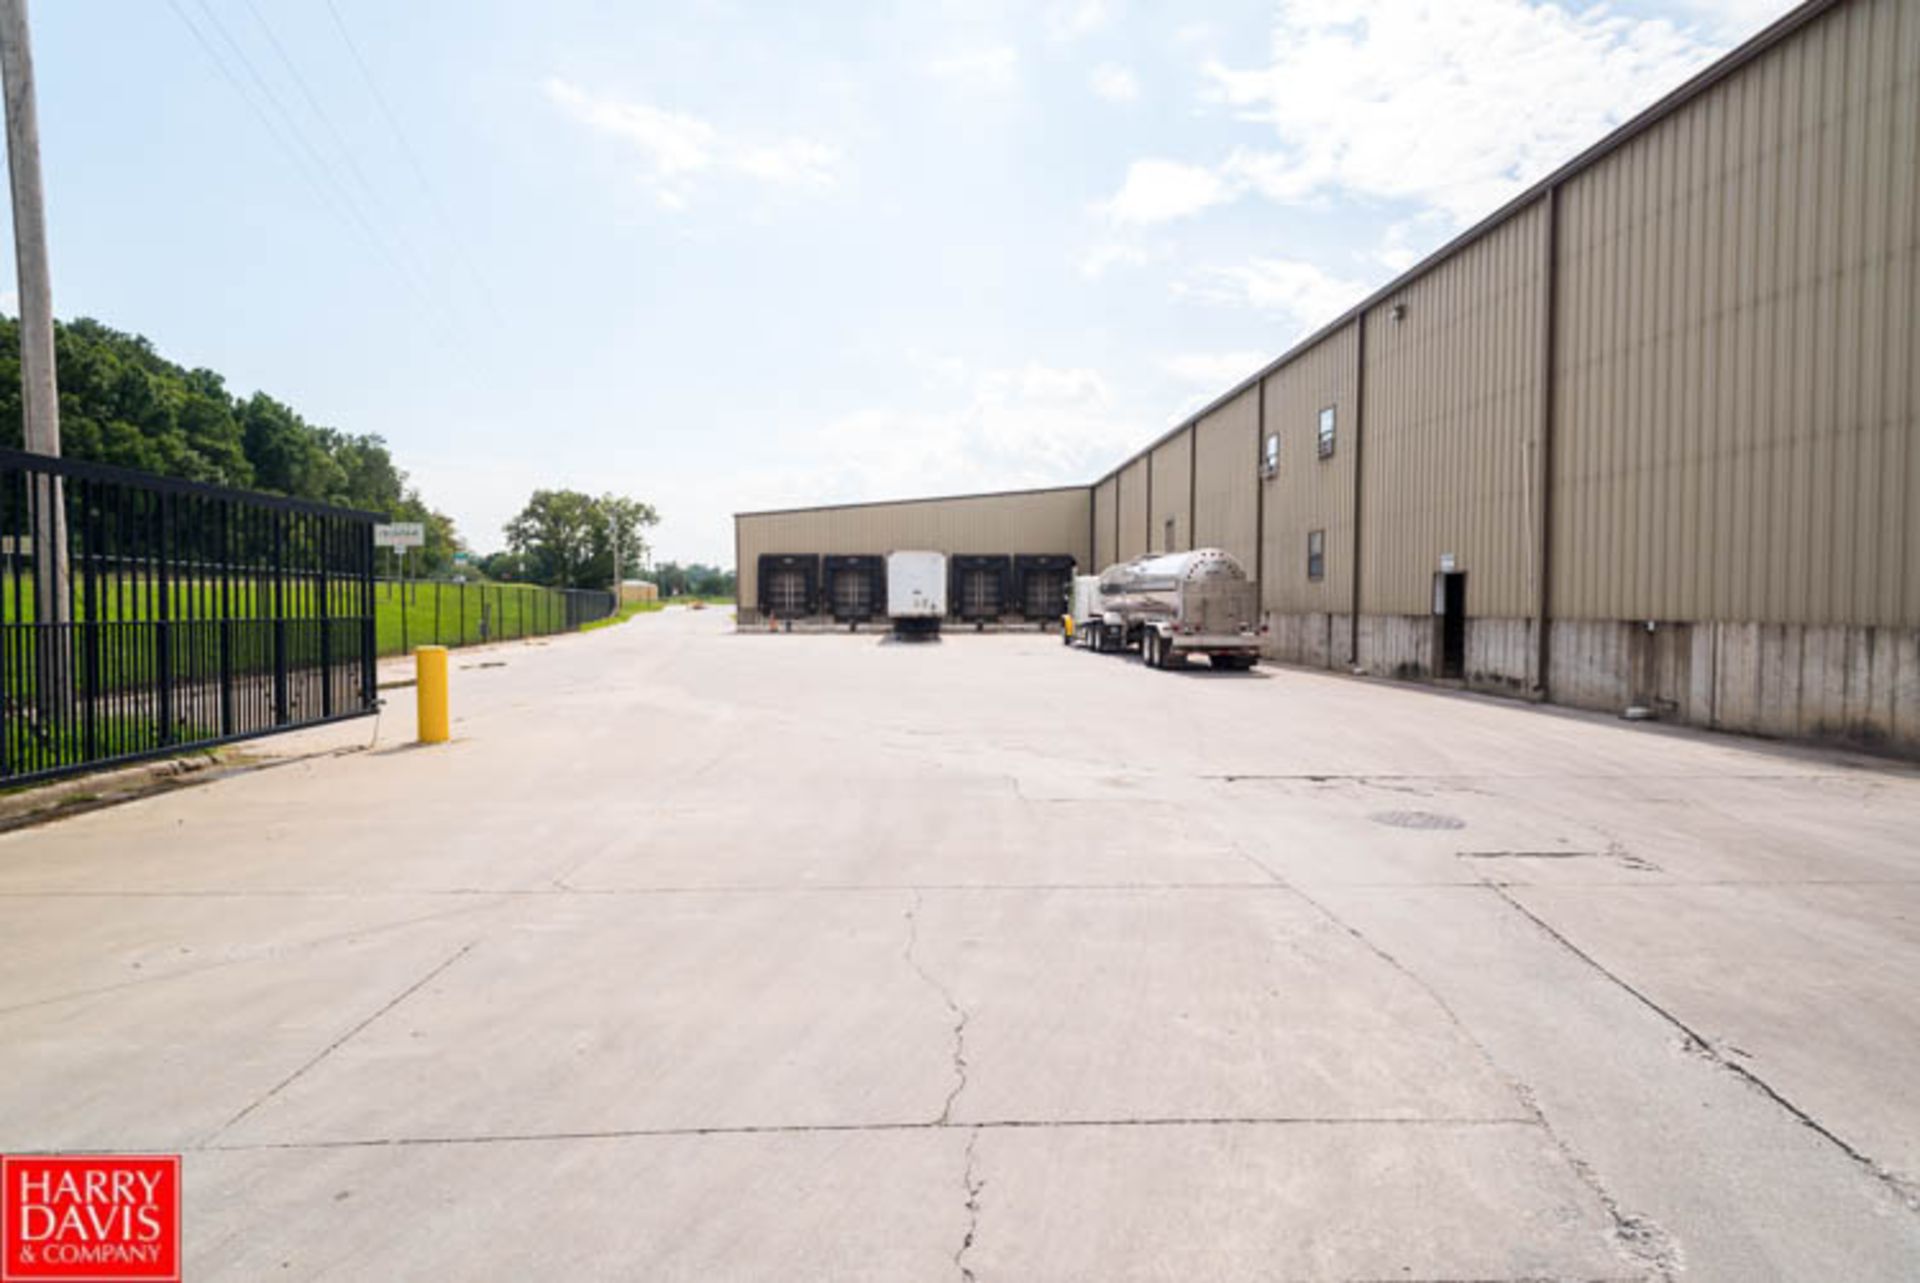 Real Estate - Former Dairy Processing Plant & Warehouse - 33 Acres - Image 9 of 27